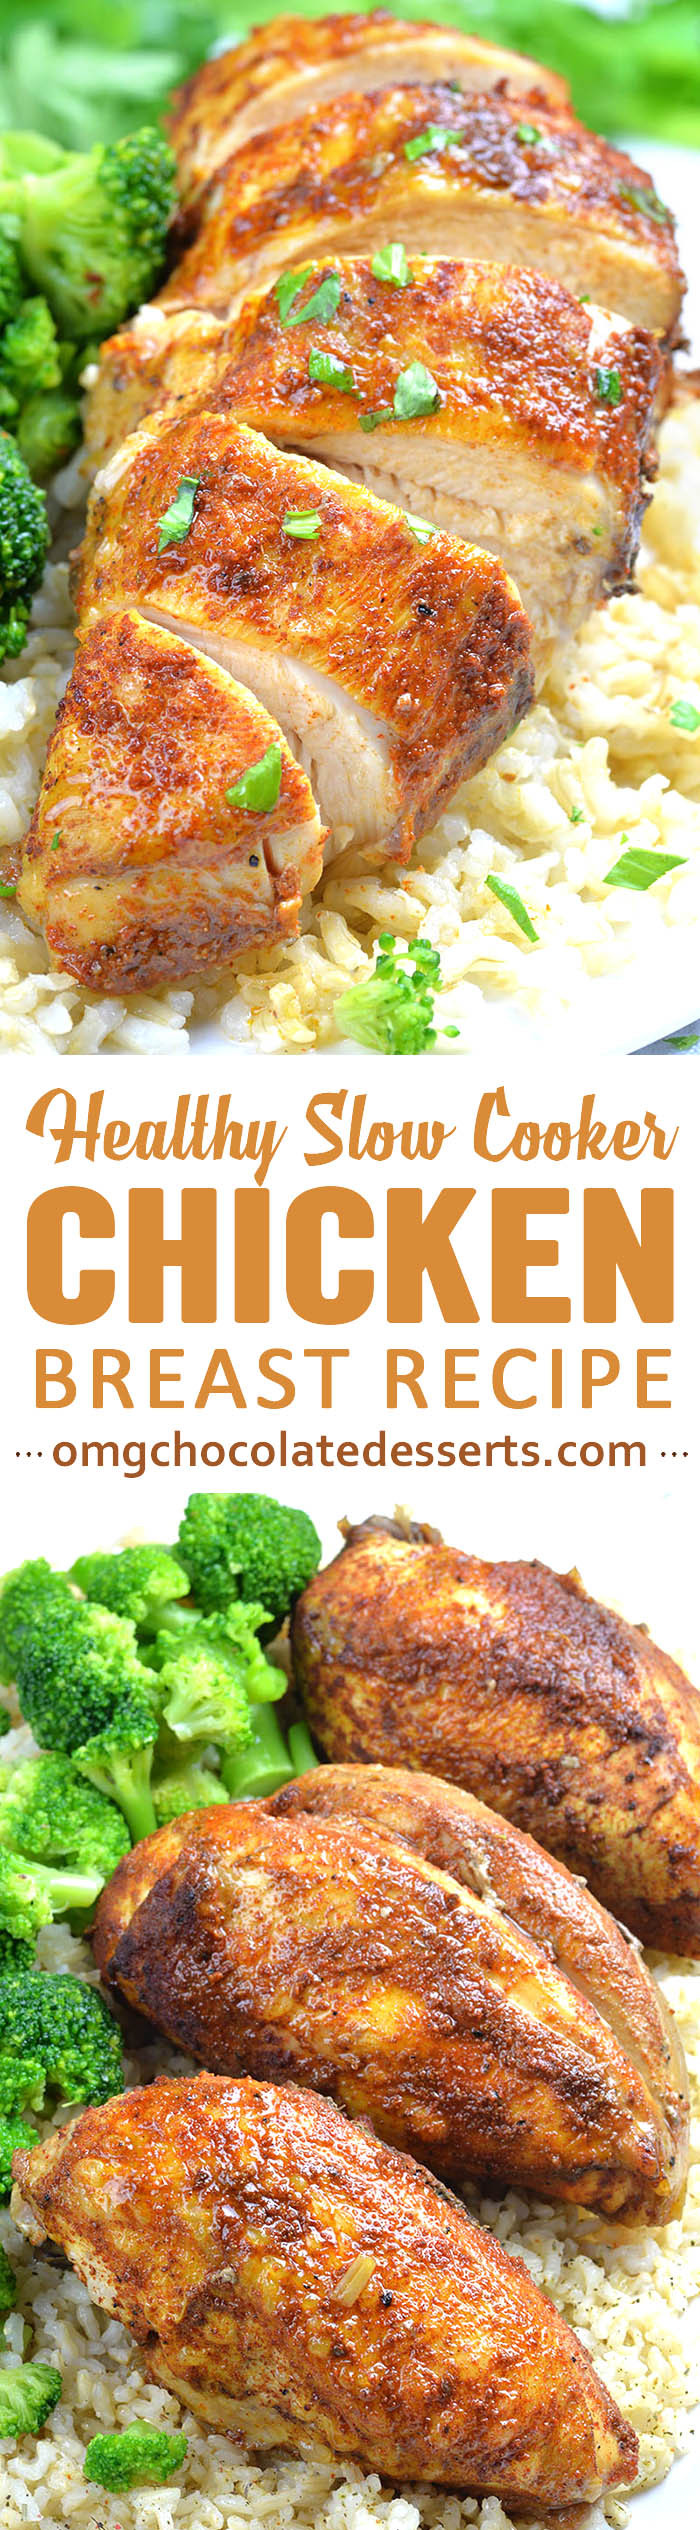 Chicken Breast Slow Cooker Recipes Healthy
 Healthy Slow Cooker Chicken Breast Recipe OMG Chocolate